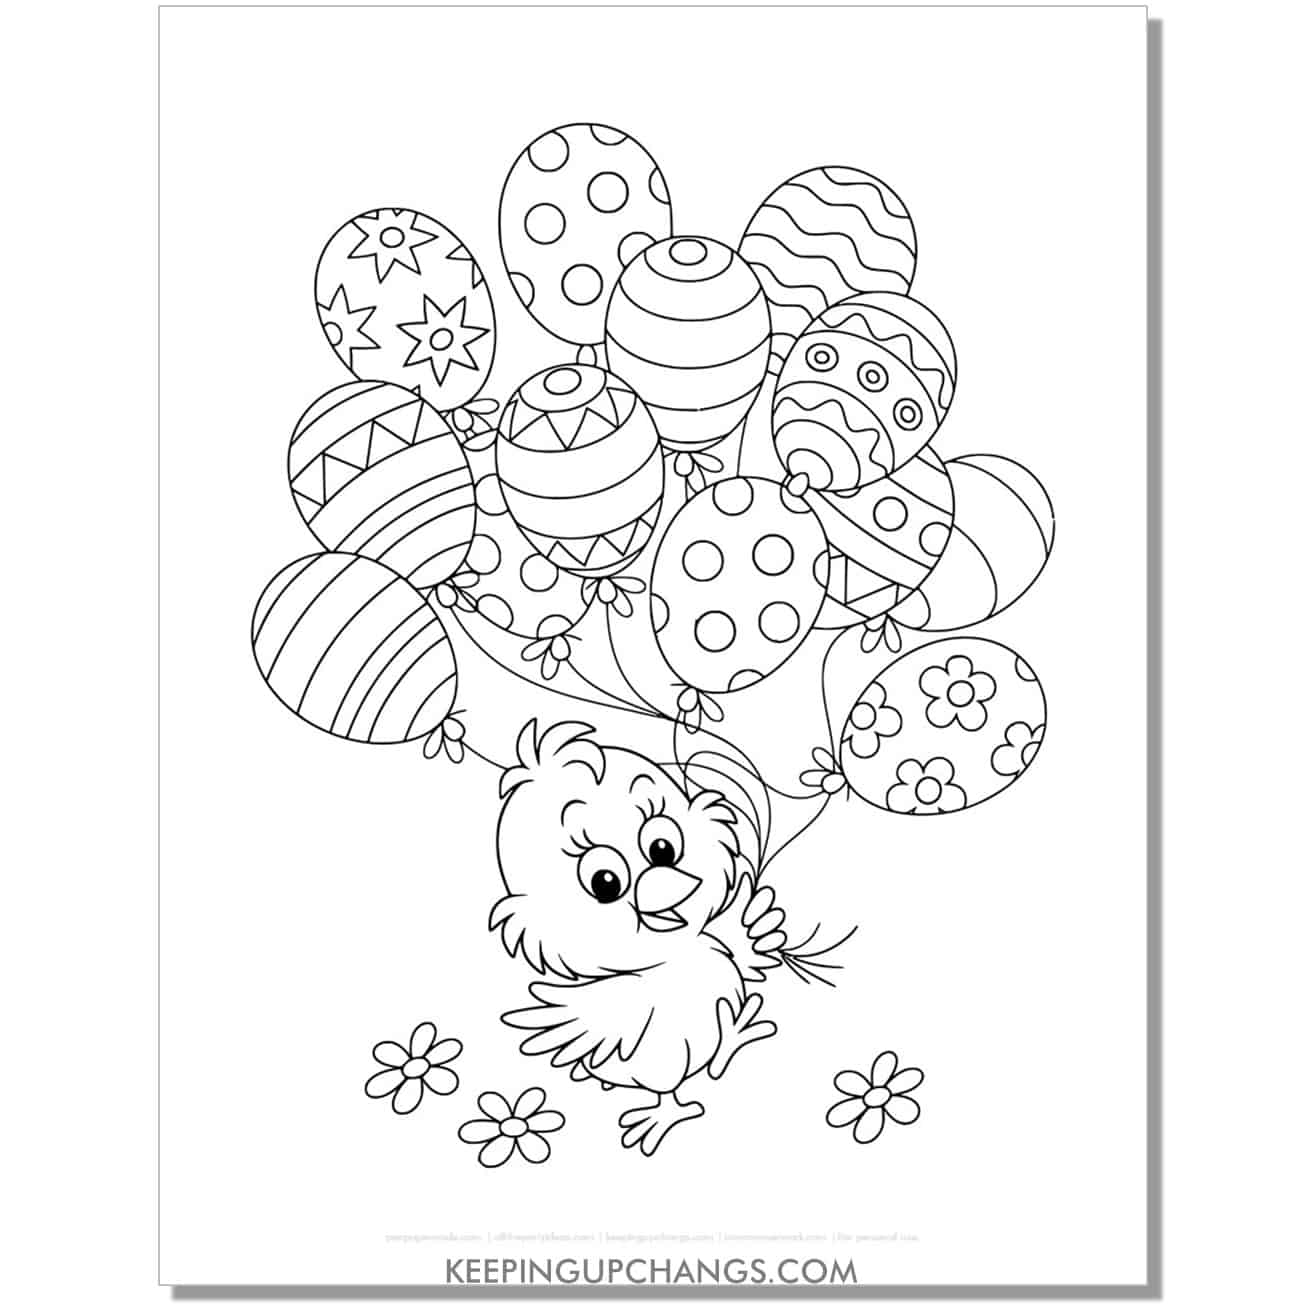 Cute chick holding bunch of Easter balloons coloring page, sheet.